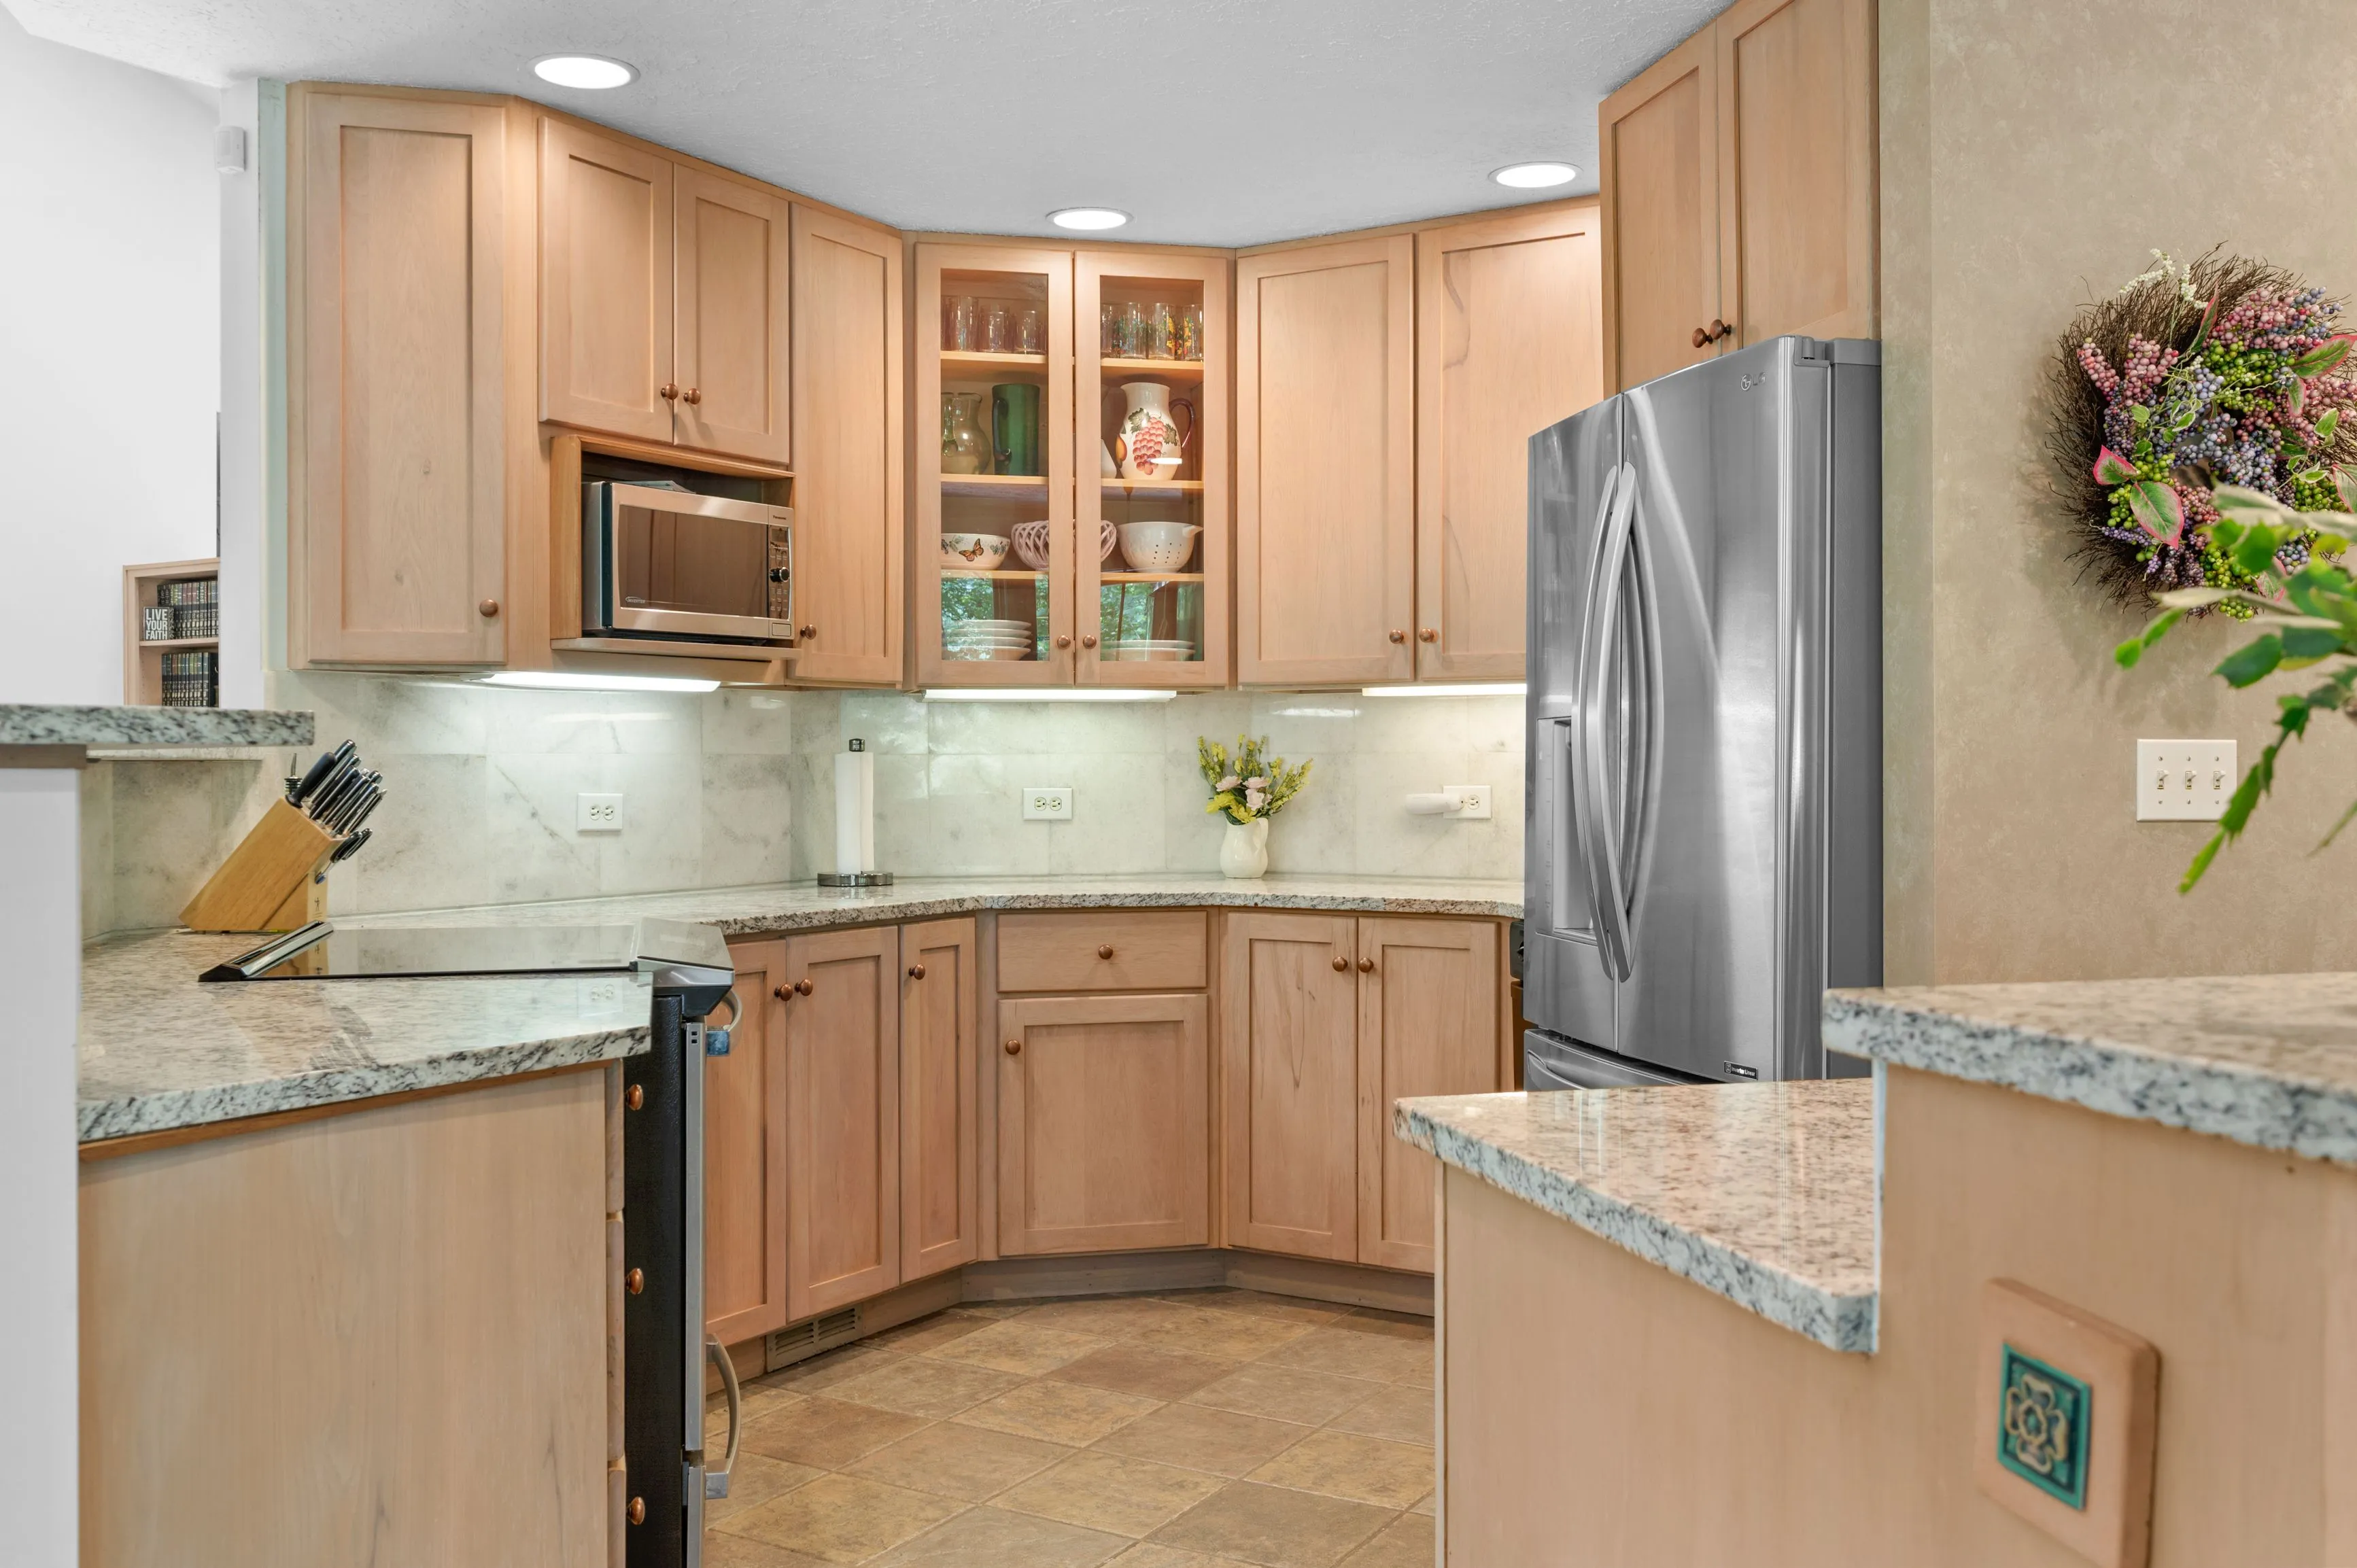 Modern kitchen interior with wooden cabinets, stainless steel refrigerator, and granite countertops.